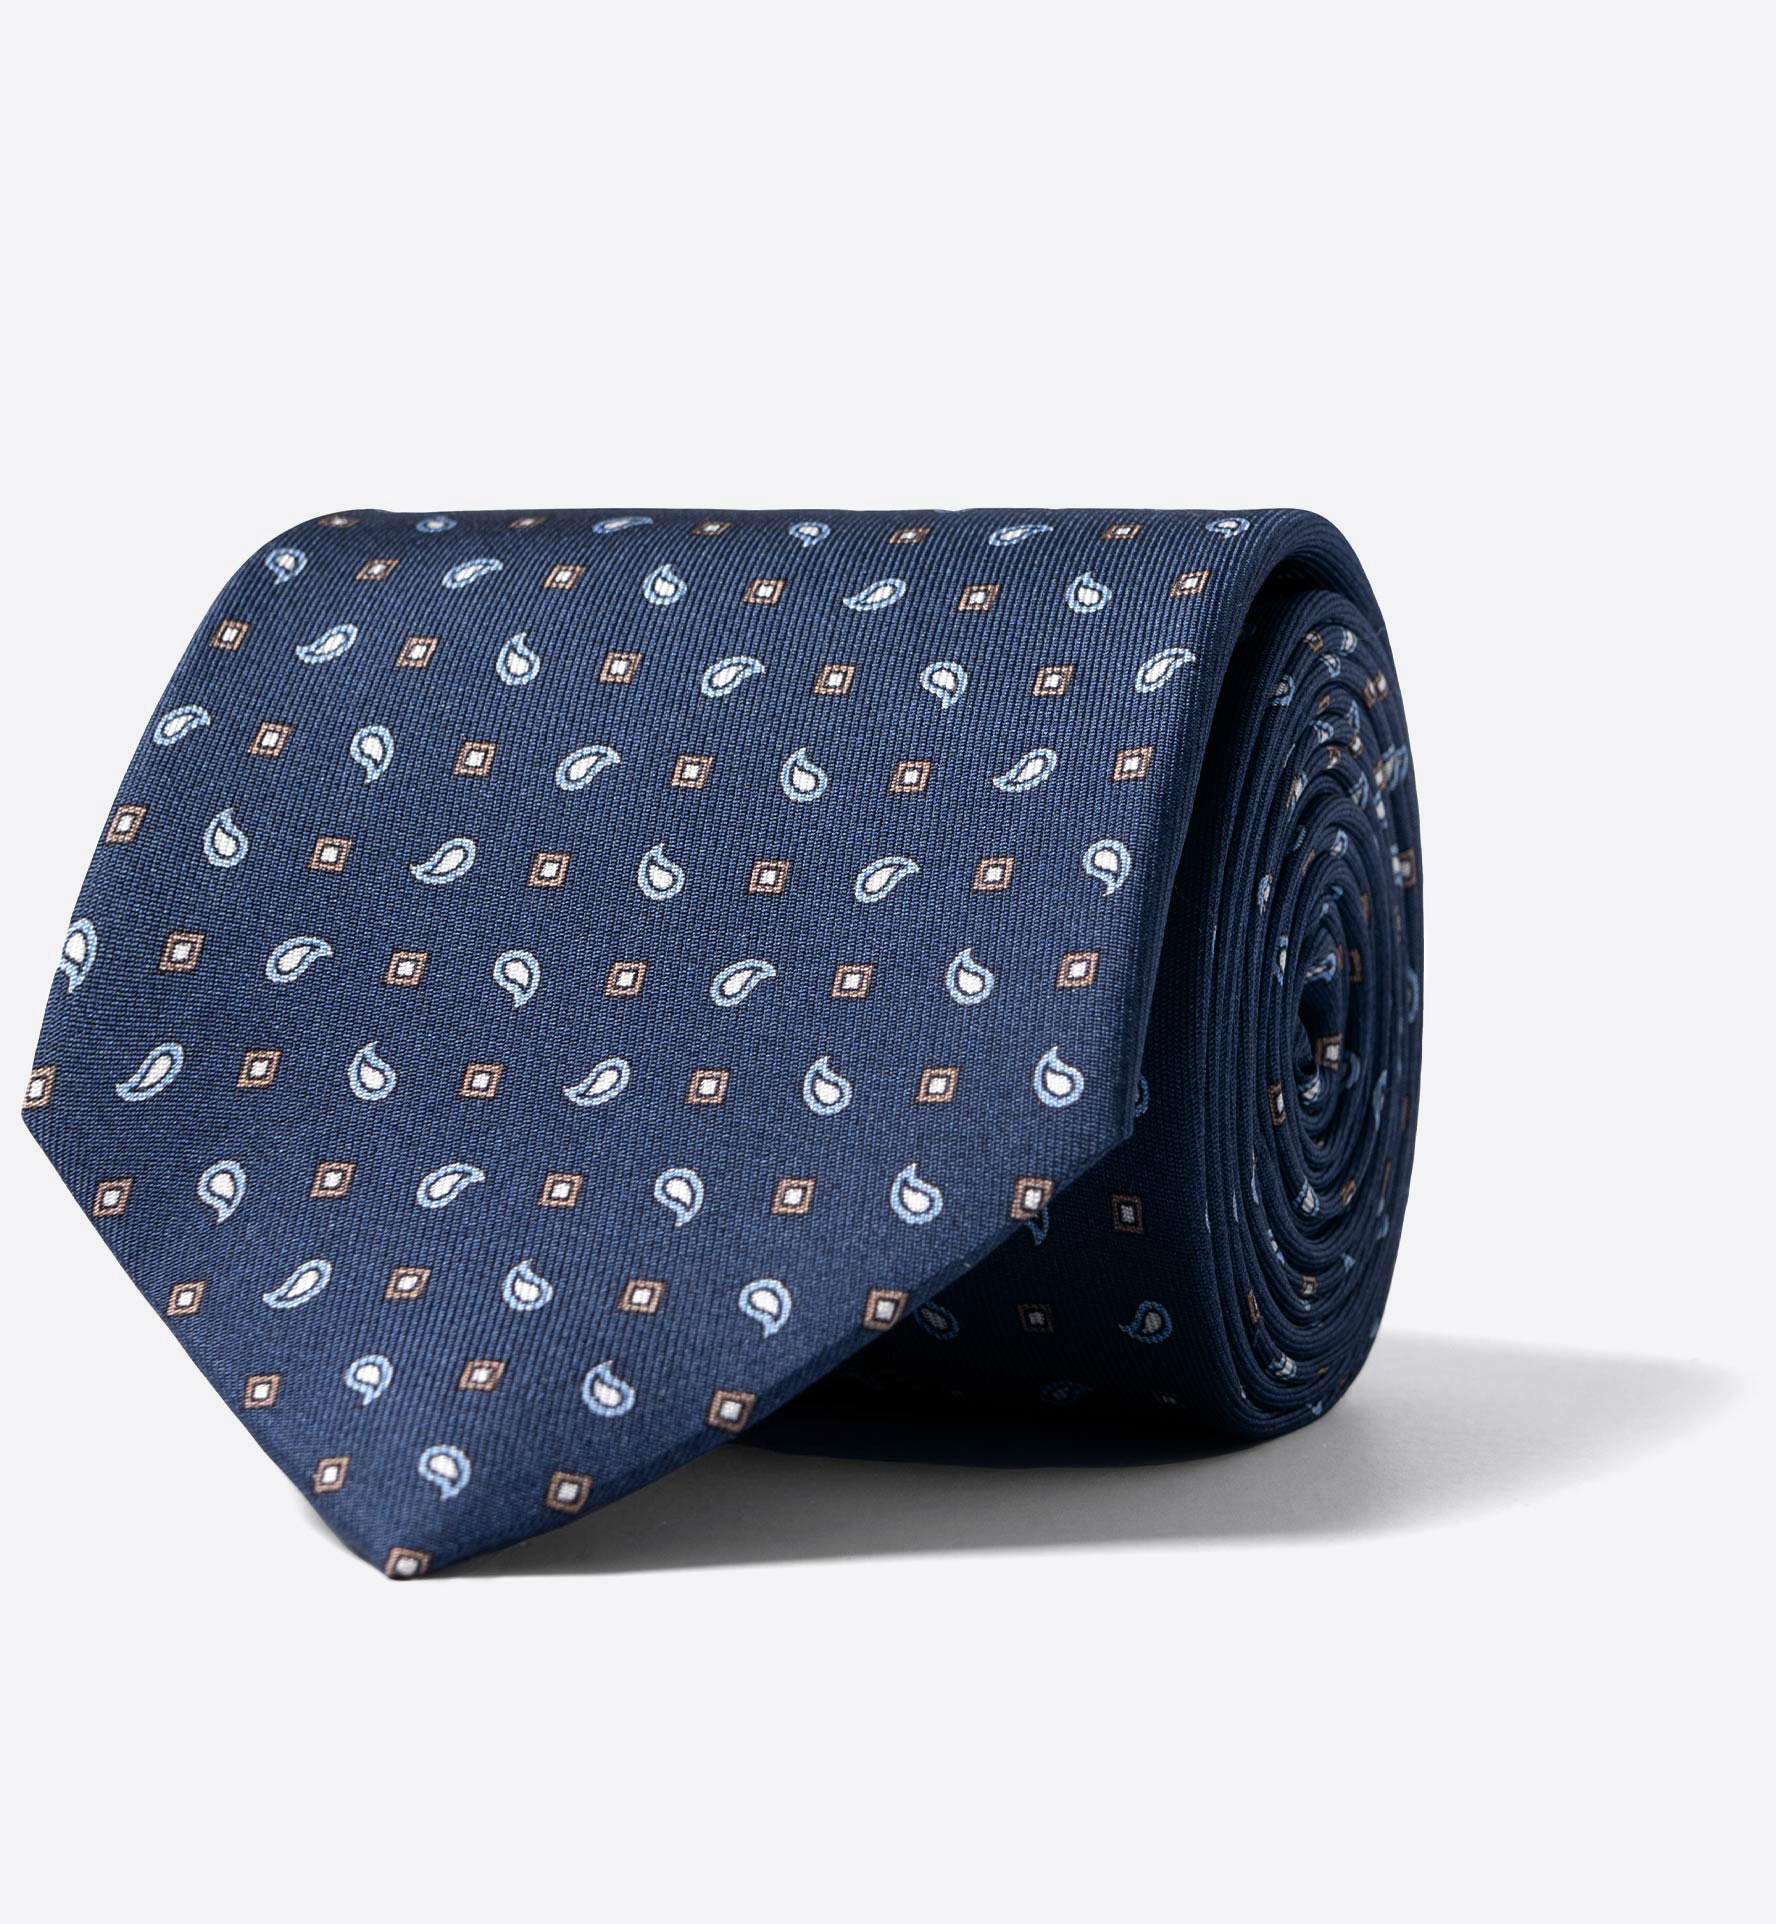 Zoom Image of Navy and Light Blue Small Paisley Print Silk Tie